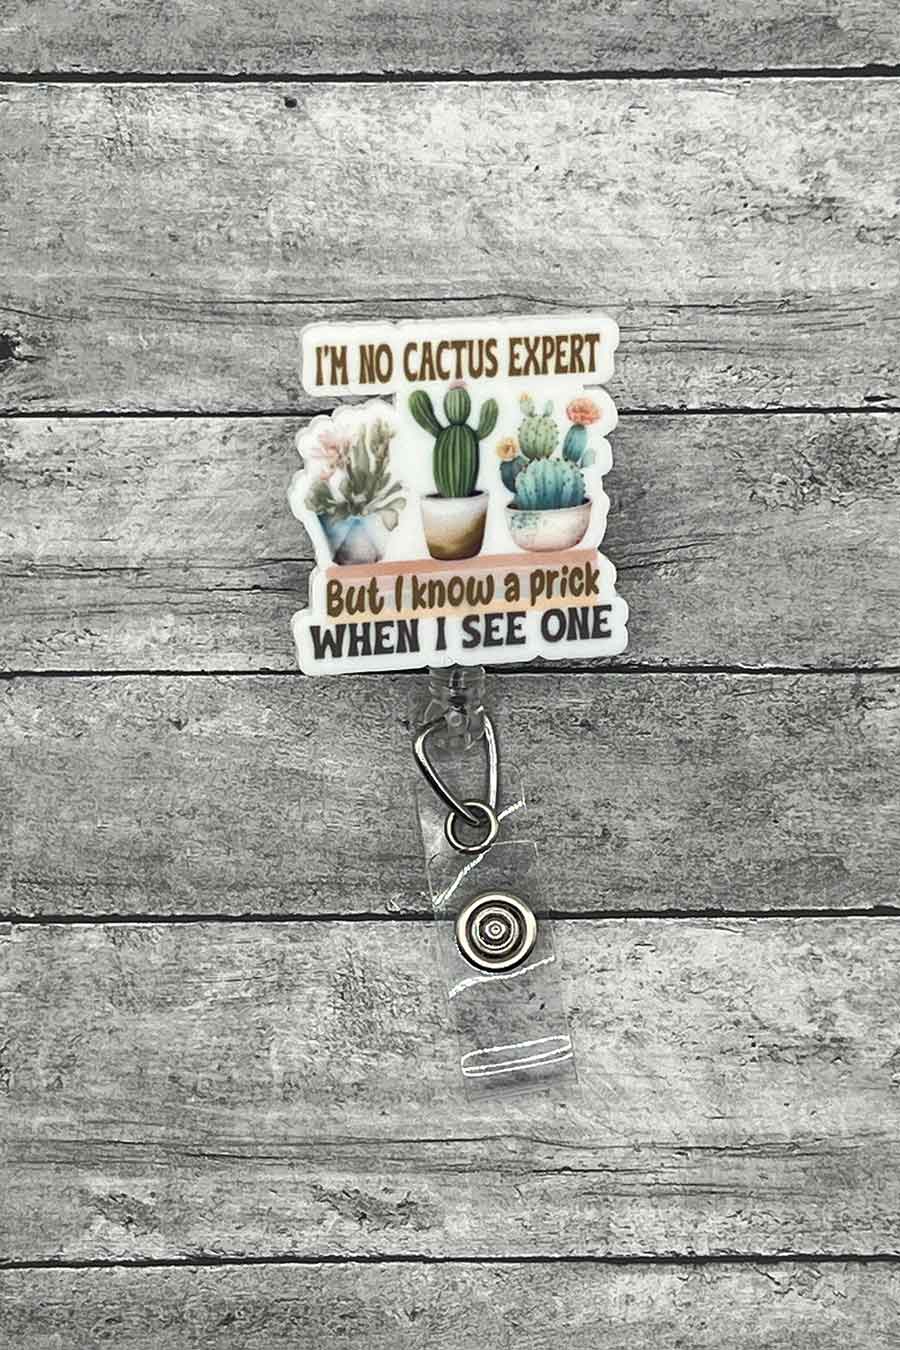 "Cactus Humor Badge Reel featuring the phrase 'I'm No Cactus Expert But I Know a Prick When I See One' with a charming illustration of various cacti.